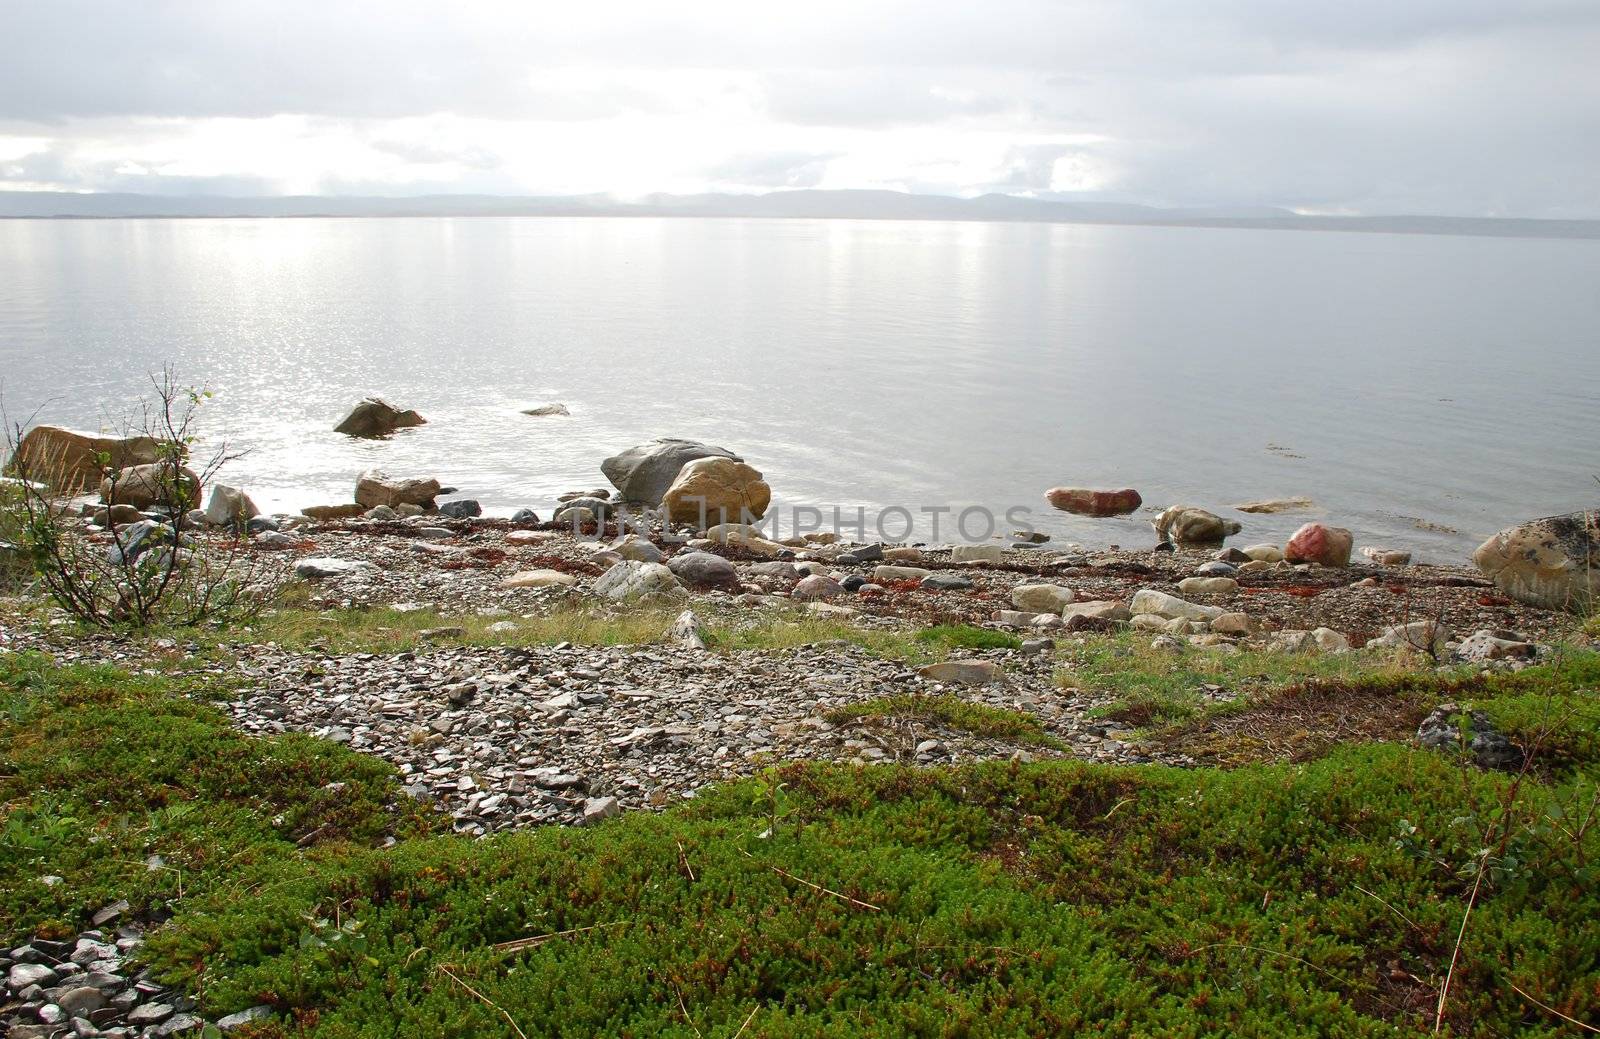 Wild lanscape of Finnmark see cost,Tundra vegetation, stones and transparante water at foreground and sun light crossinf frog and clouds and refrecting in water surfce